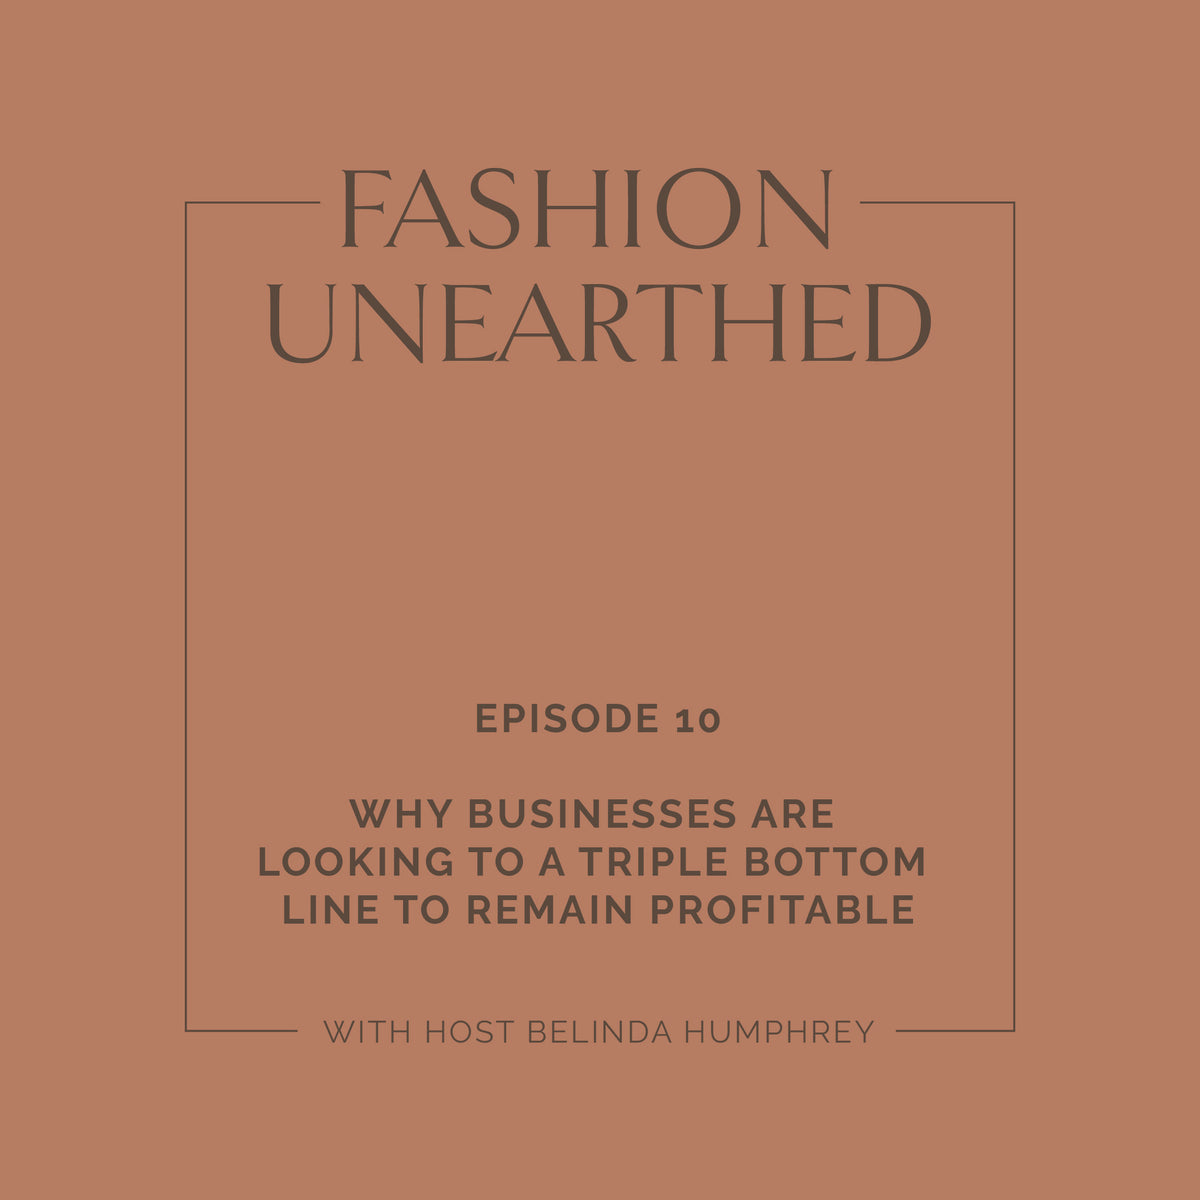 Episode 10: Why Businesses are looking to a Triple Bottom Line to remain profitable